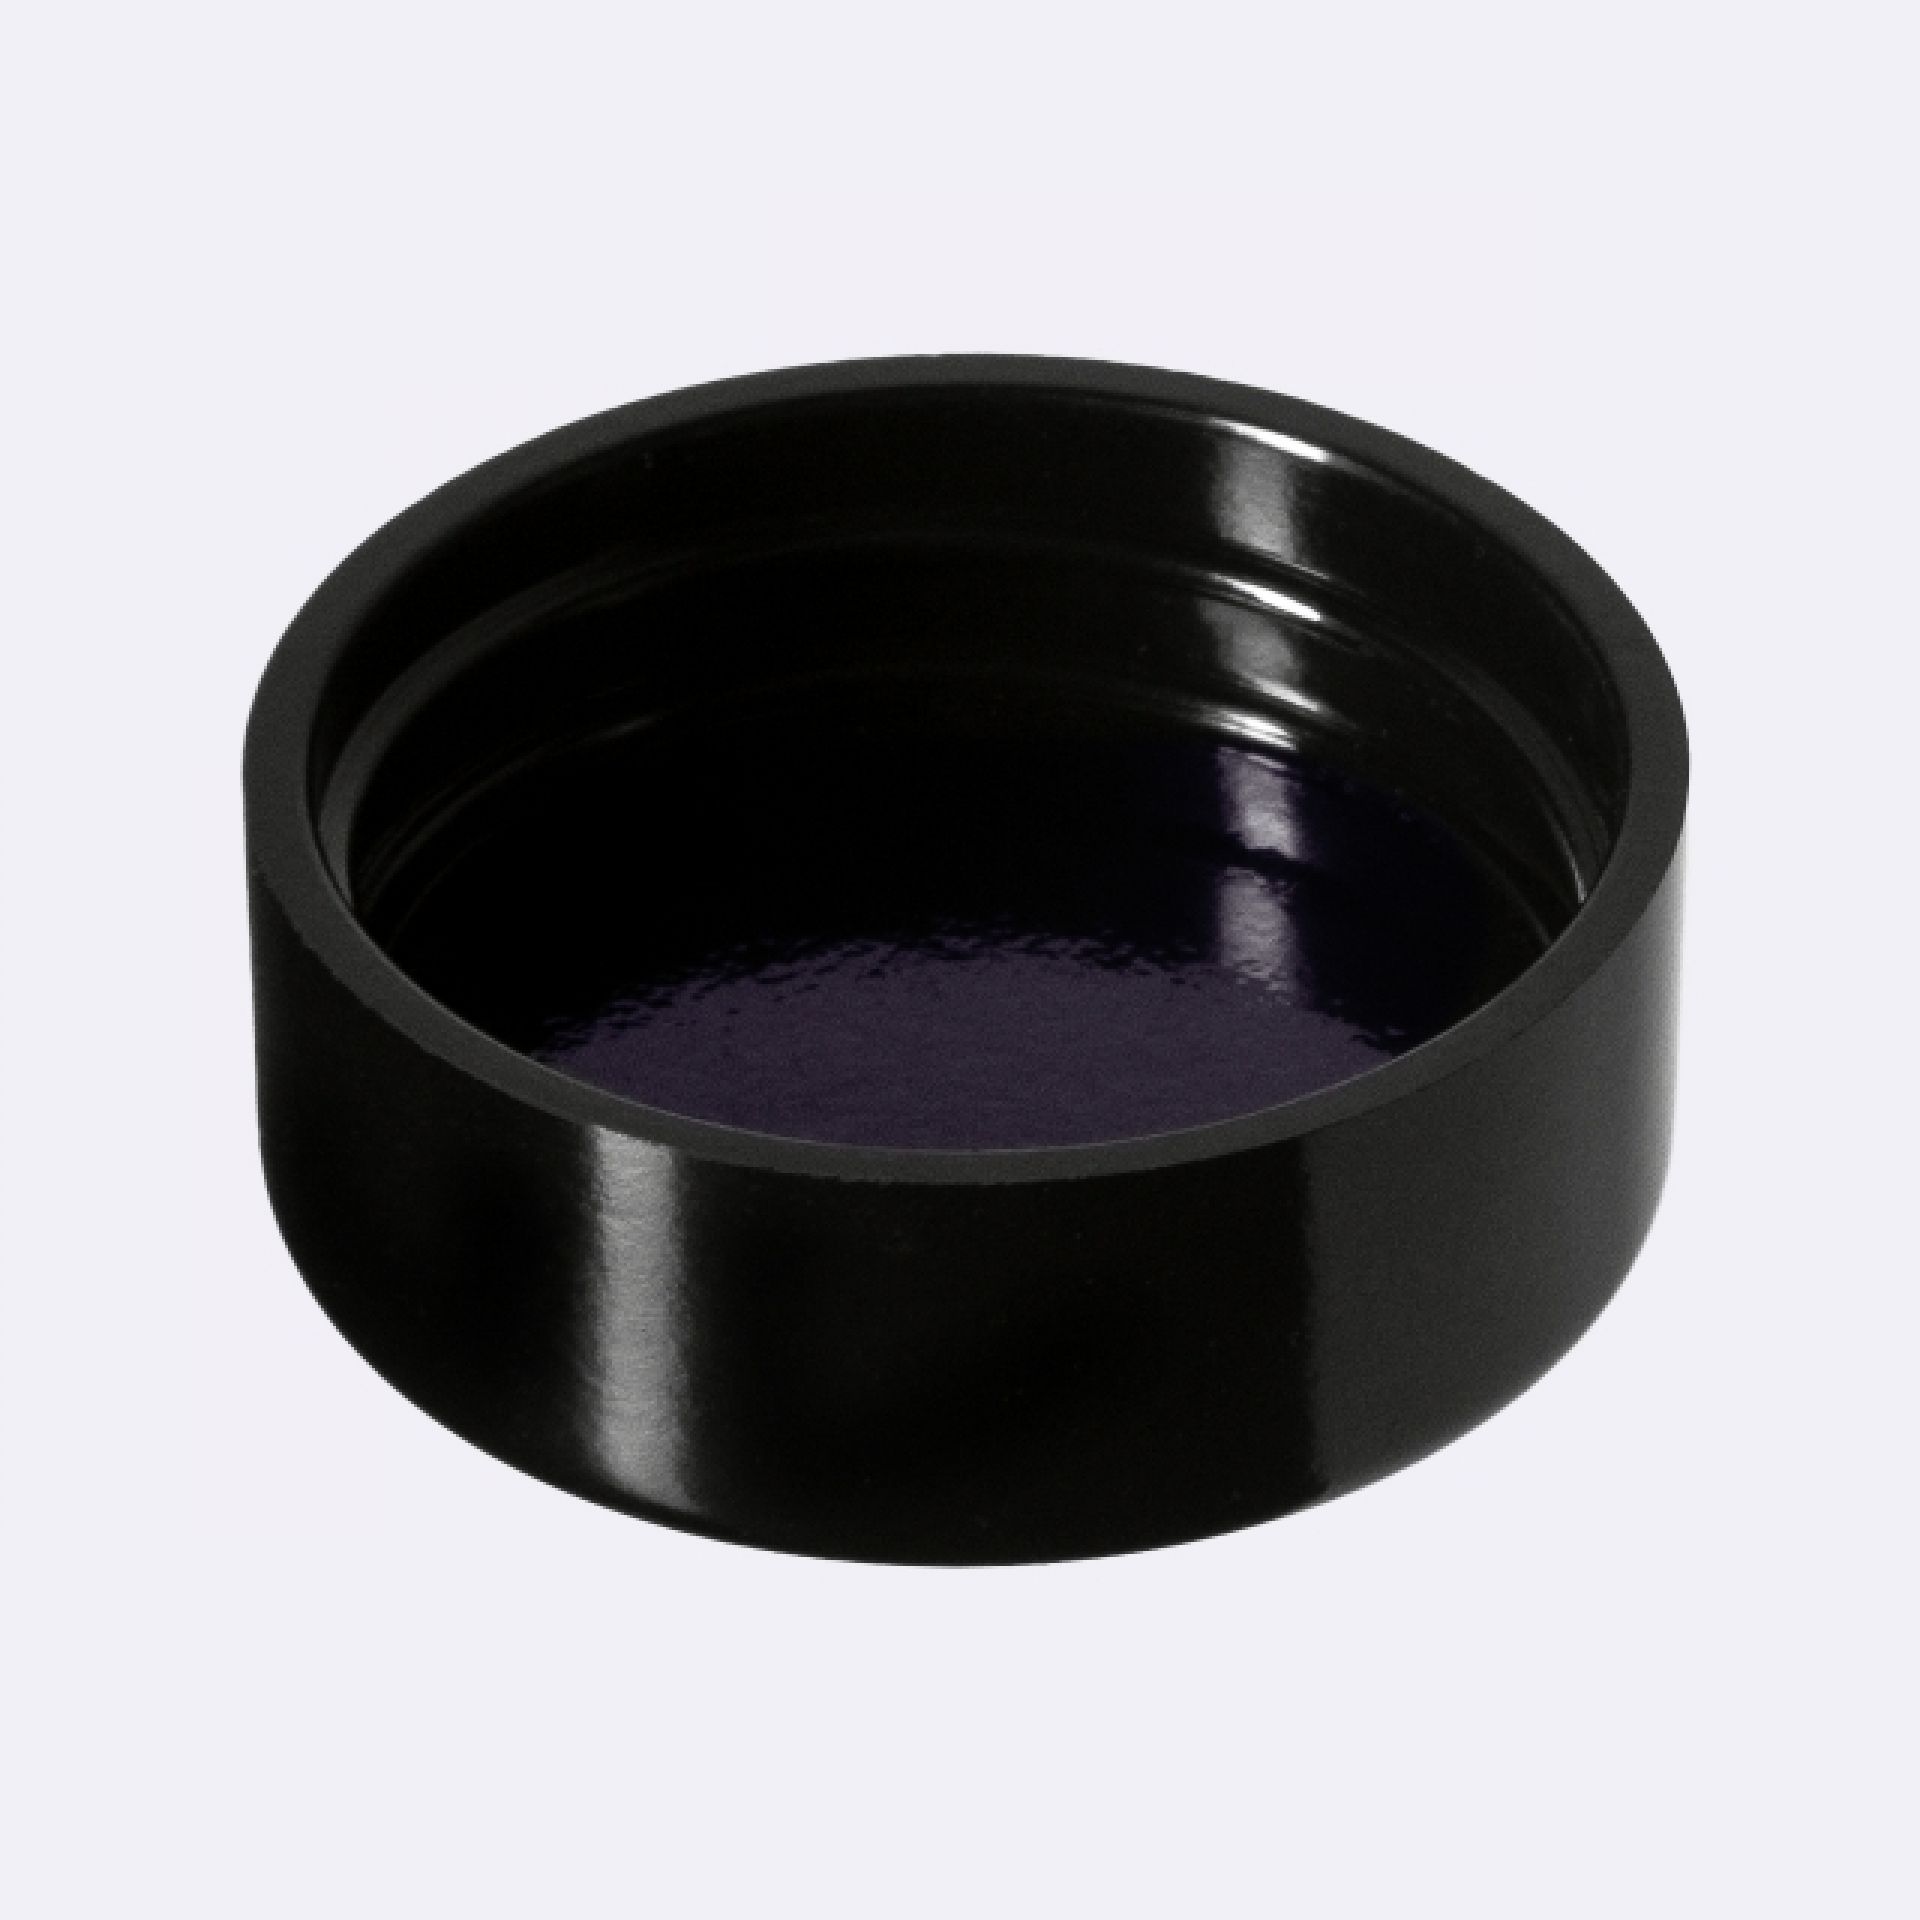 Lid Modern 30 special, PP, black, glossy finish, violet Phan inlay (Ceres 5)